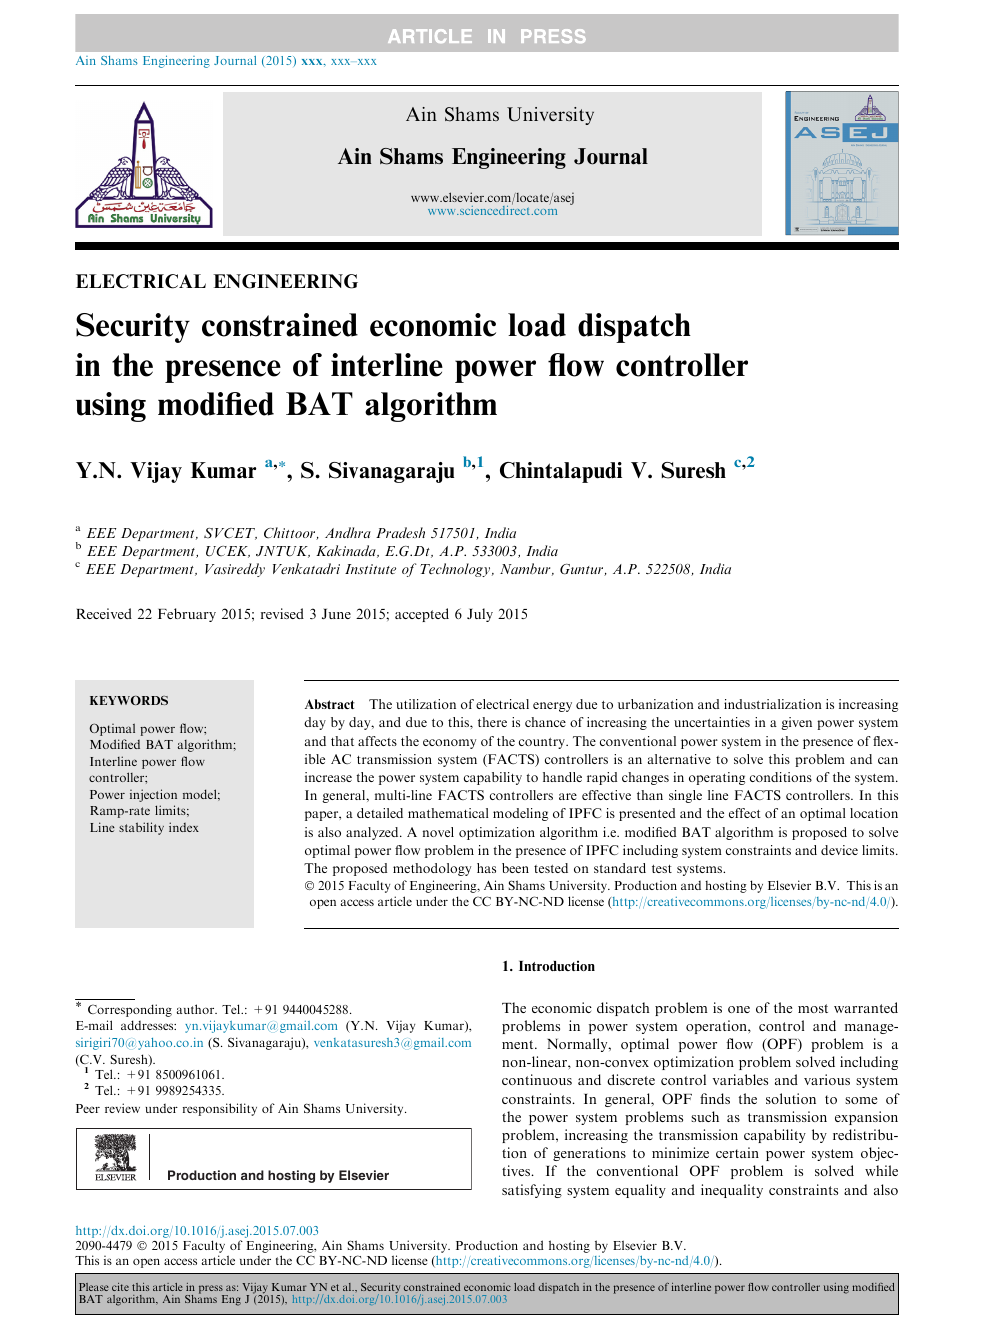 Security Constrained Economic Load Dispatch In The Presence Of Interline Power Flow Controller Using Modified Bat Algorithm Topic Of Research Paper In Electrical Engineering Electronic Engineering Information Engineering Download Scholarly Article